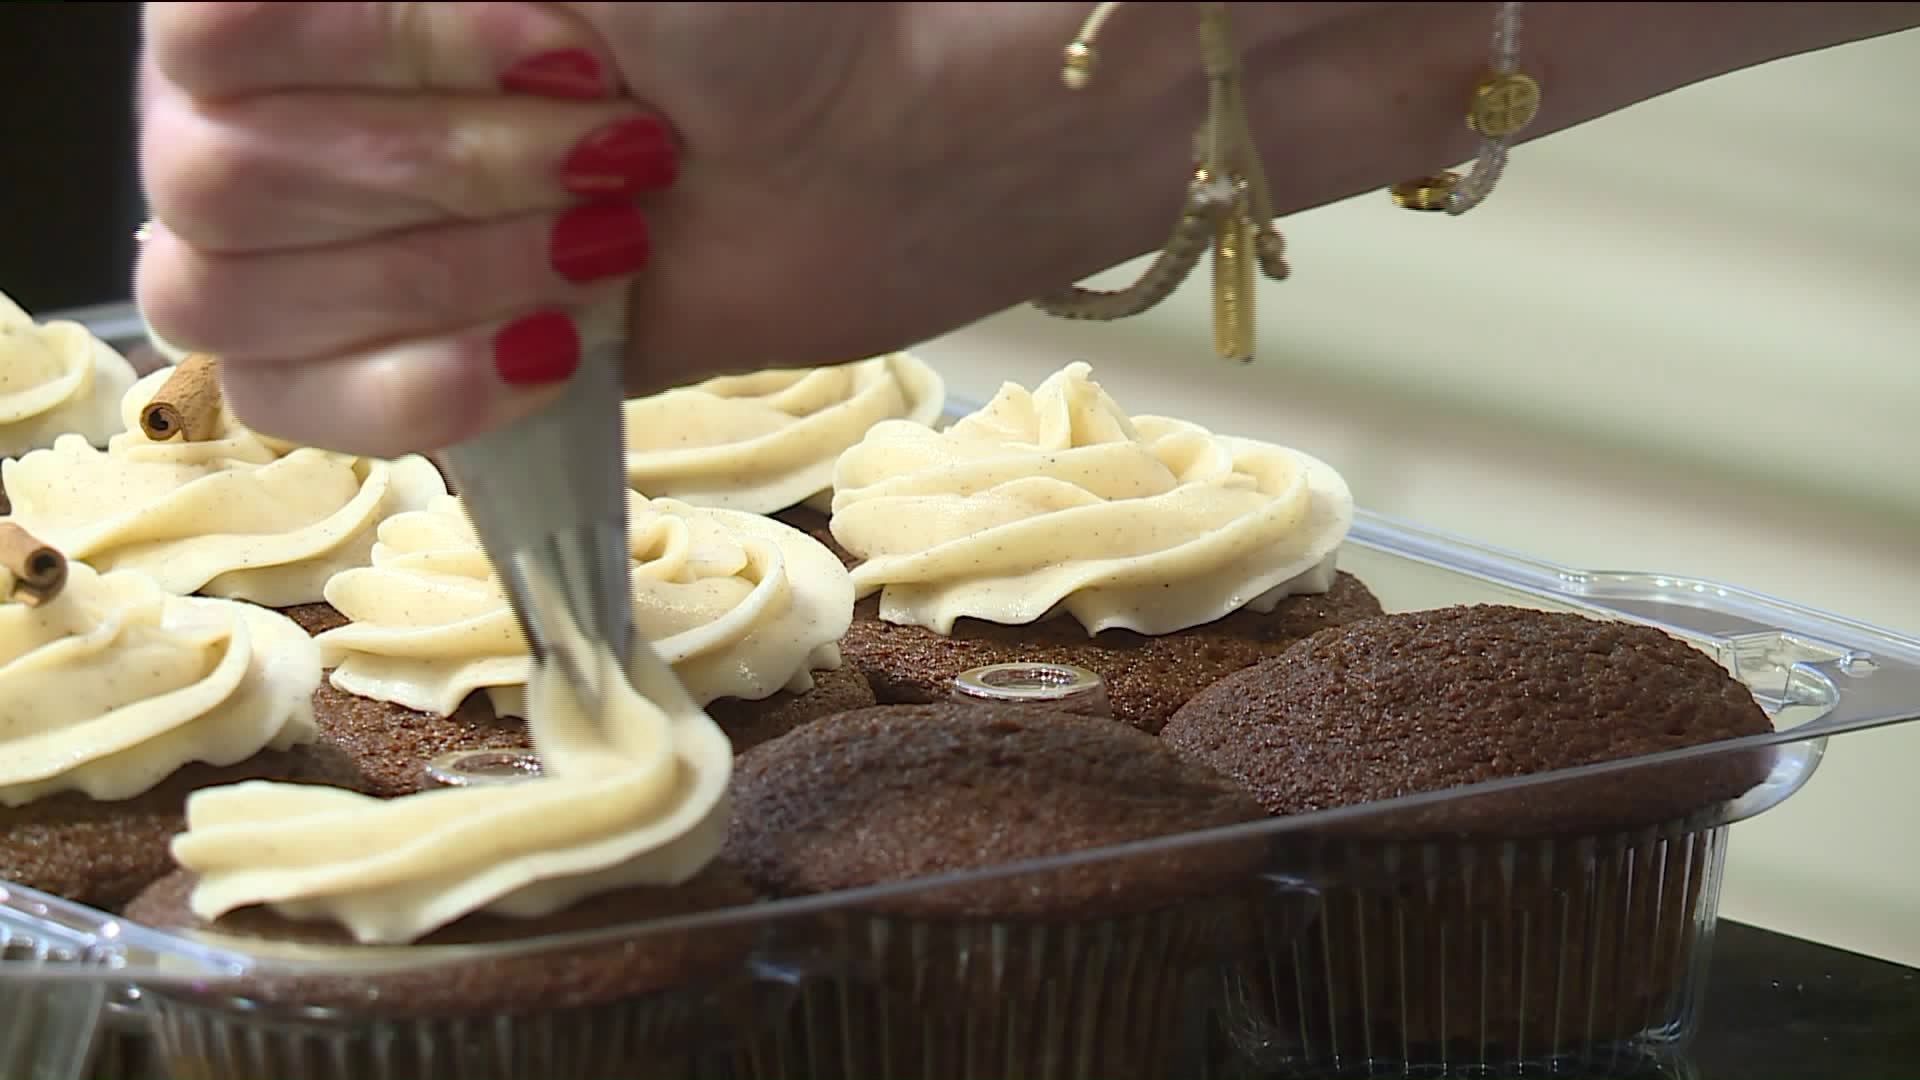 WorkinCT: Mother Fudger`s Cupcakes brings sweet flavors to a sassy name